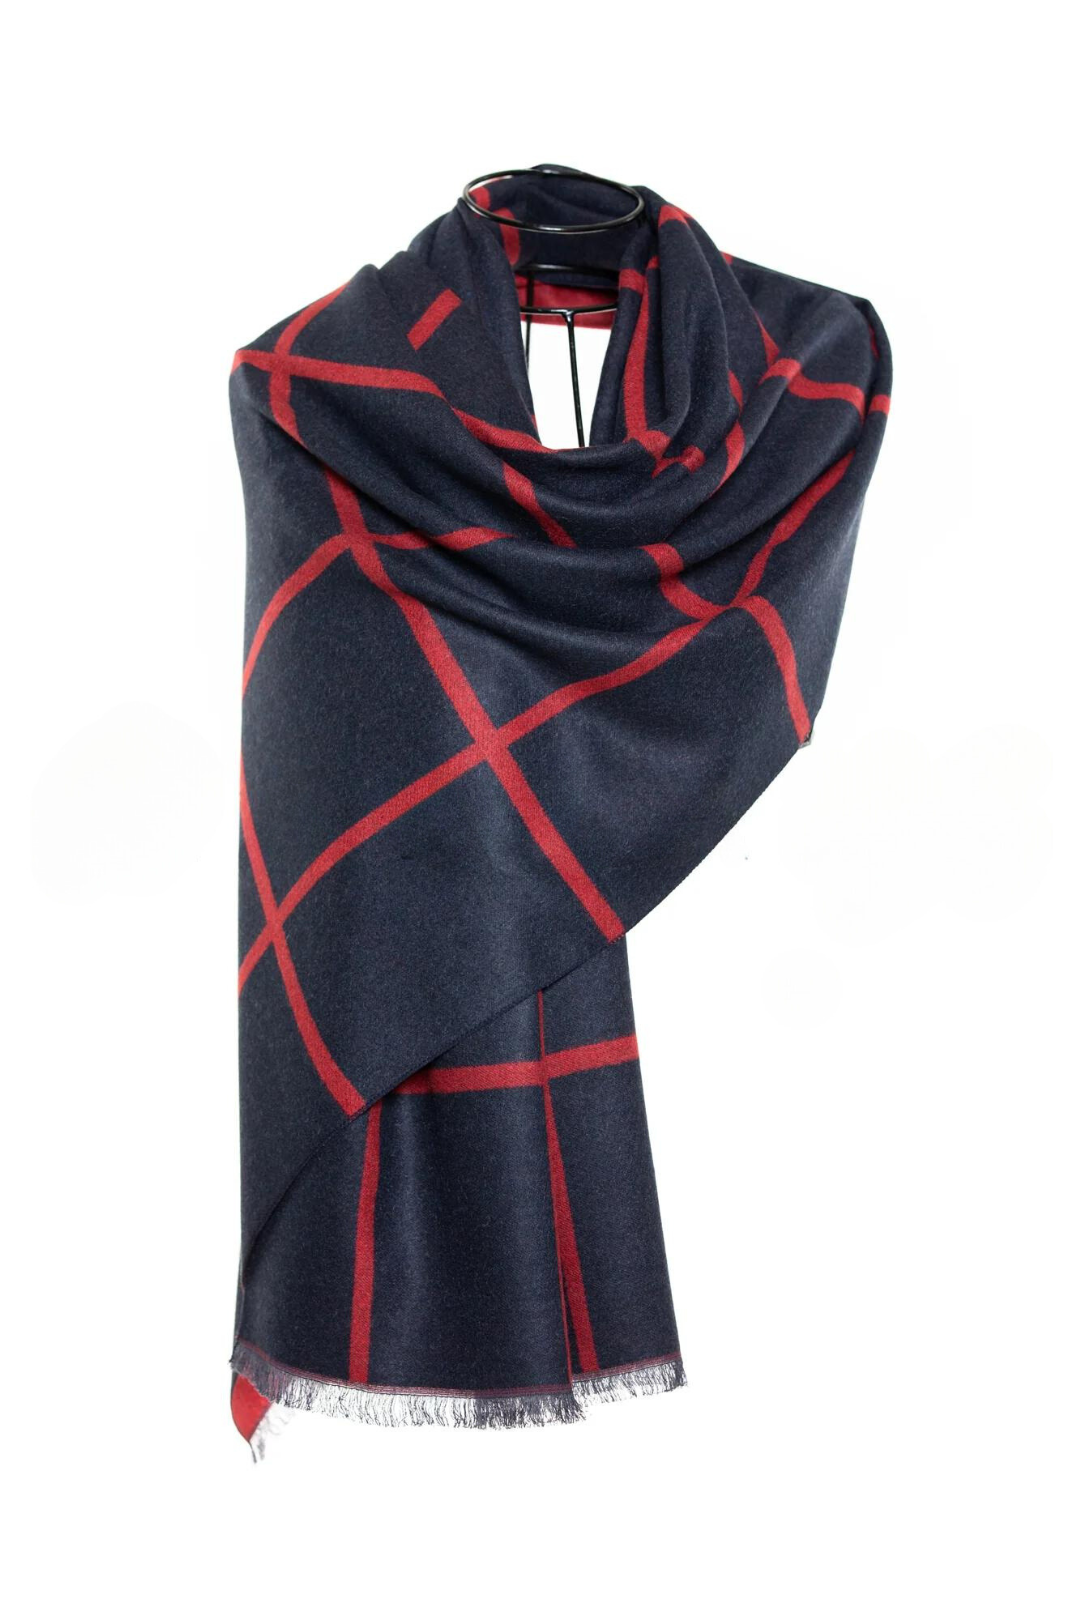 Reversible Mo-shmere Modal Cashmere Checkers Shawl - Dark Navy Red